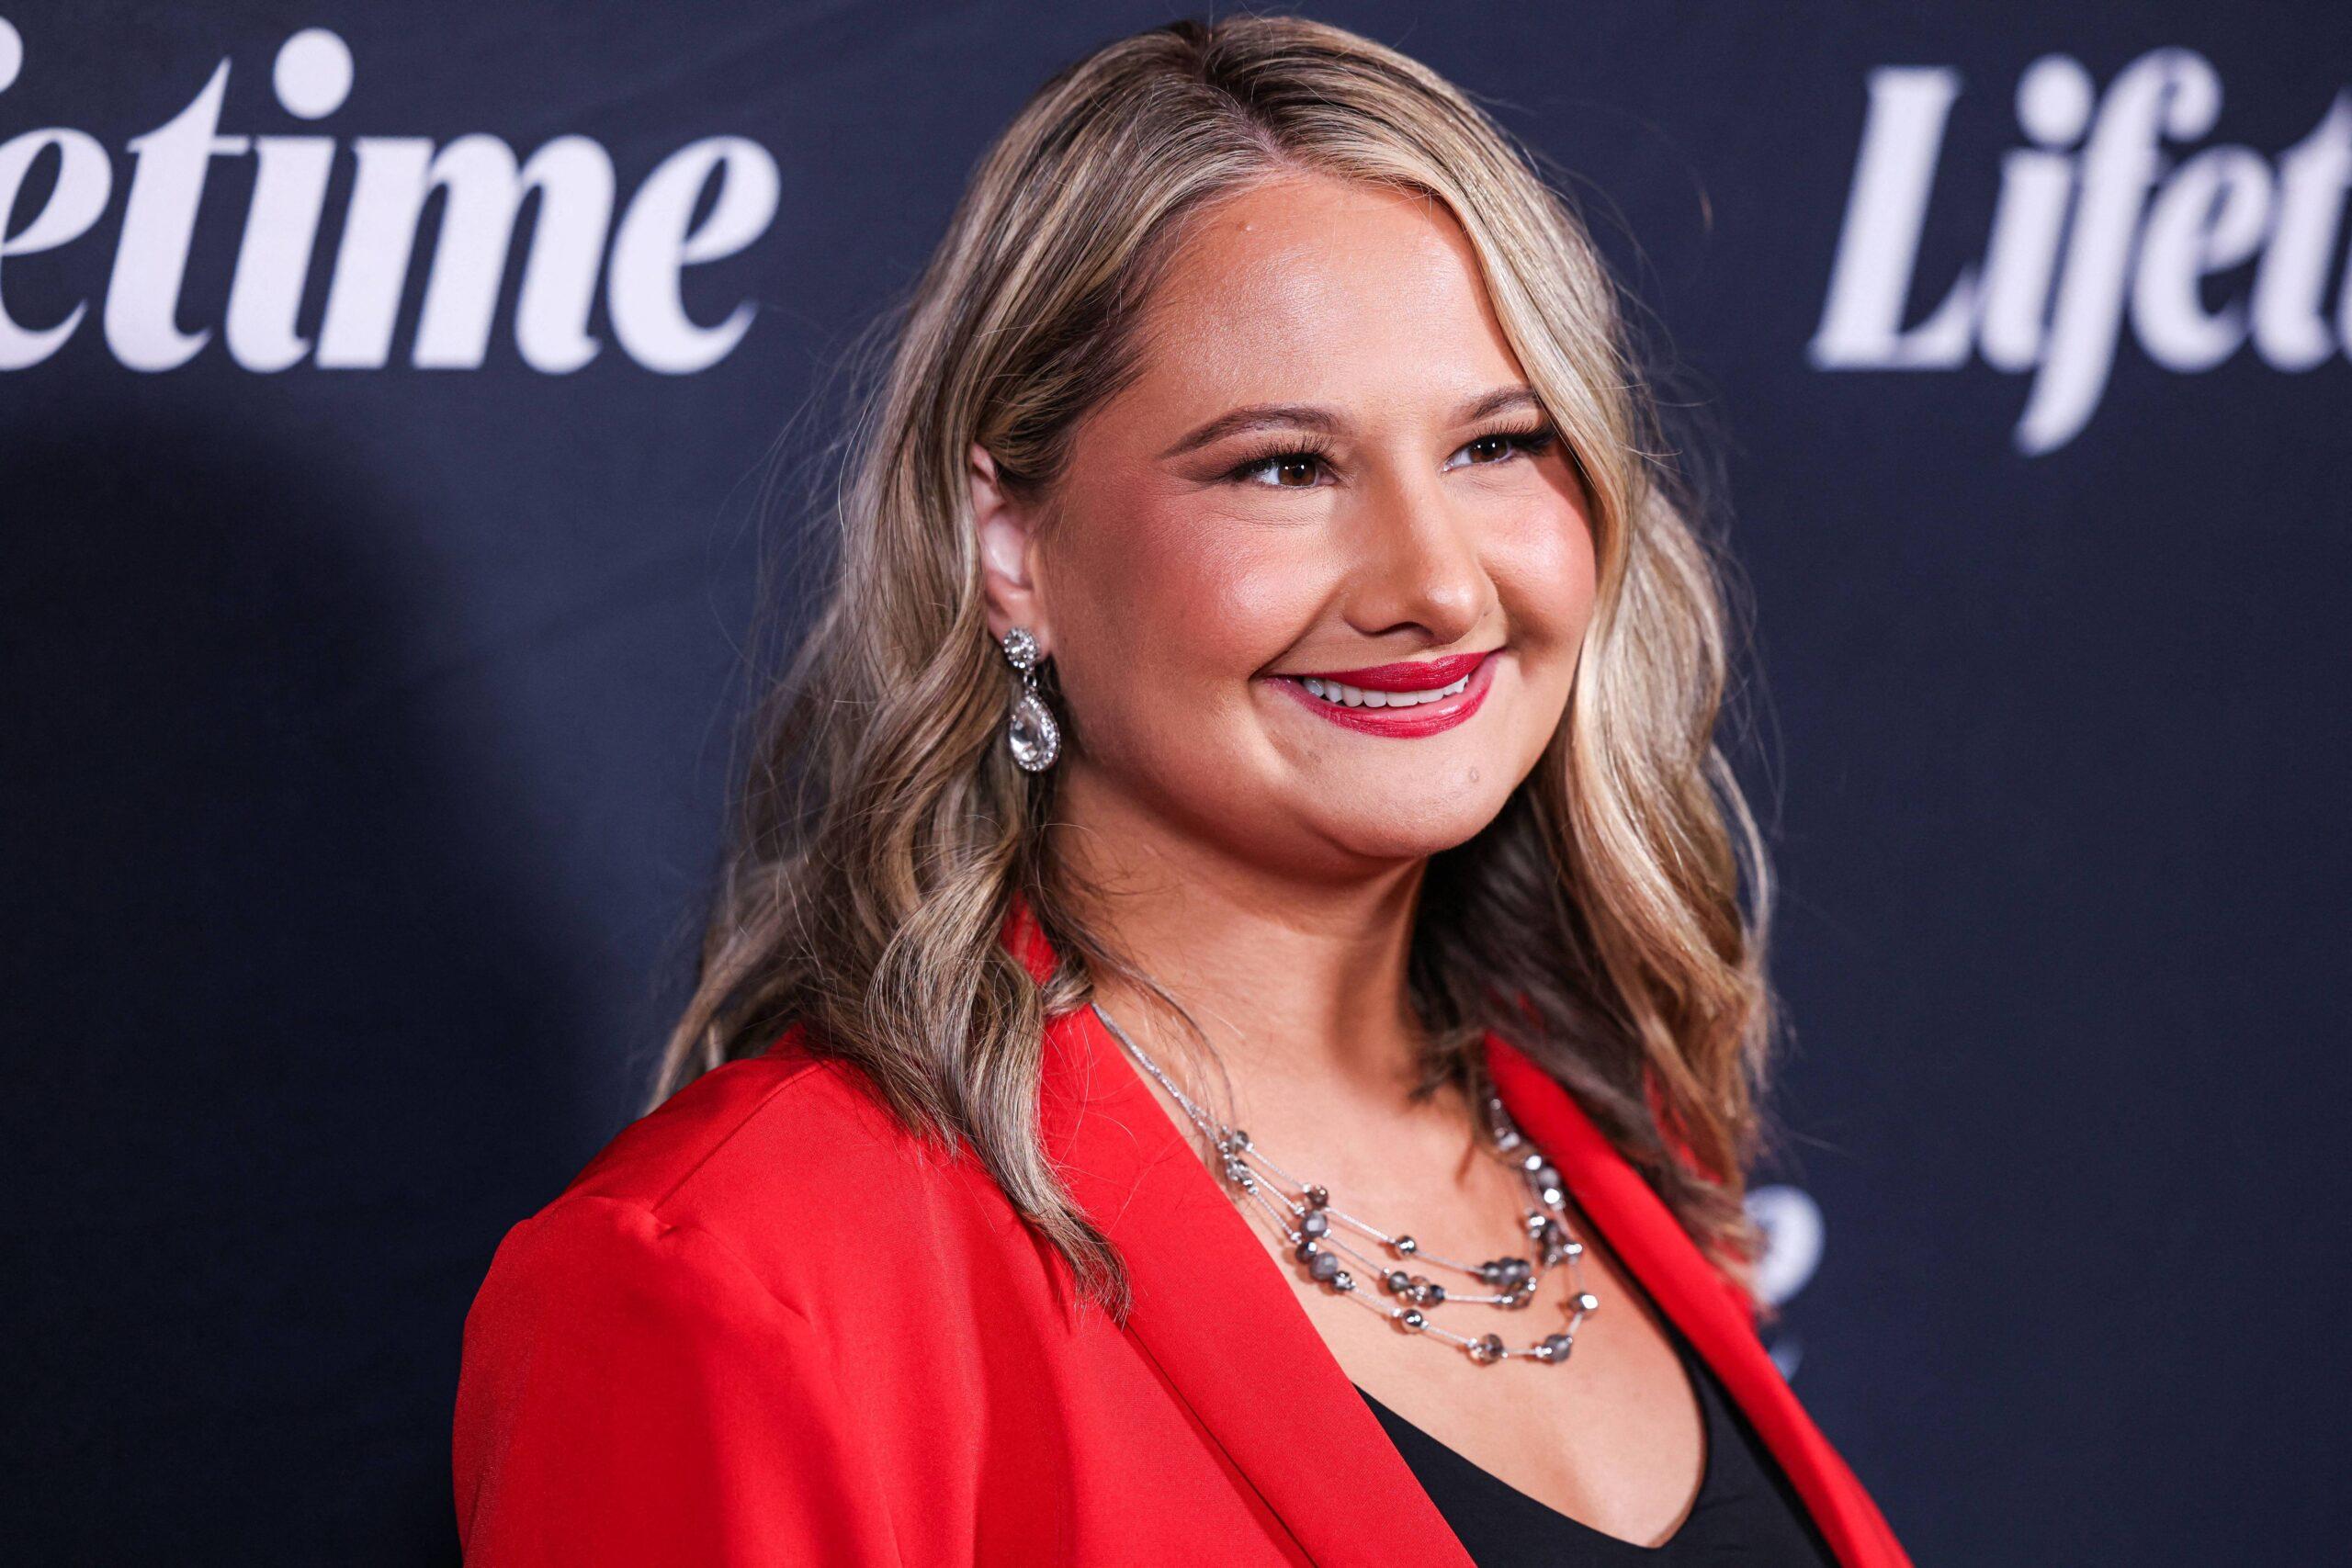 Gypsy Rose Blanchard at an Evening with Lifetime: Conversations on the FYC Event's Controversies